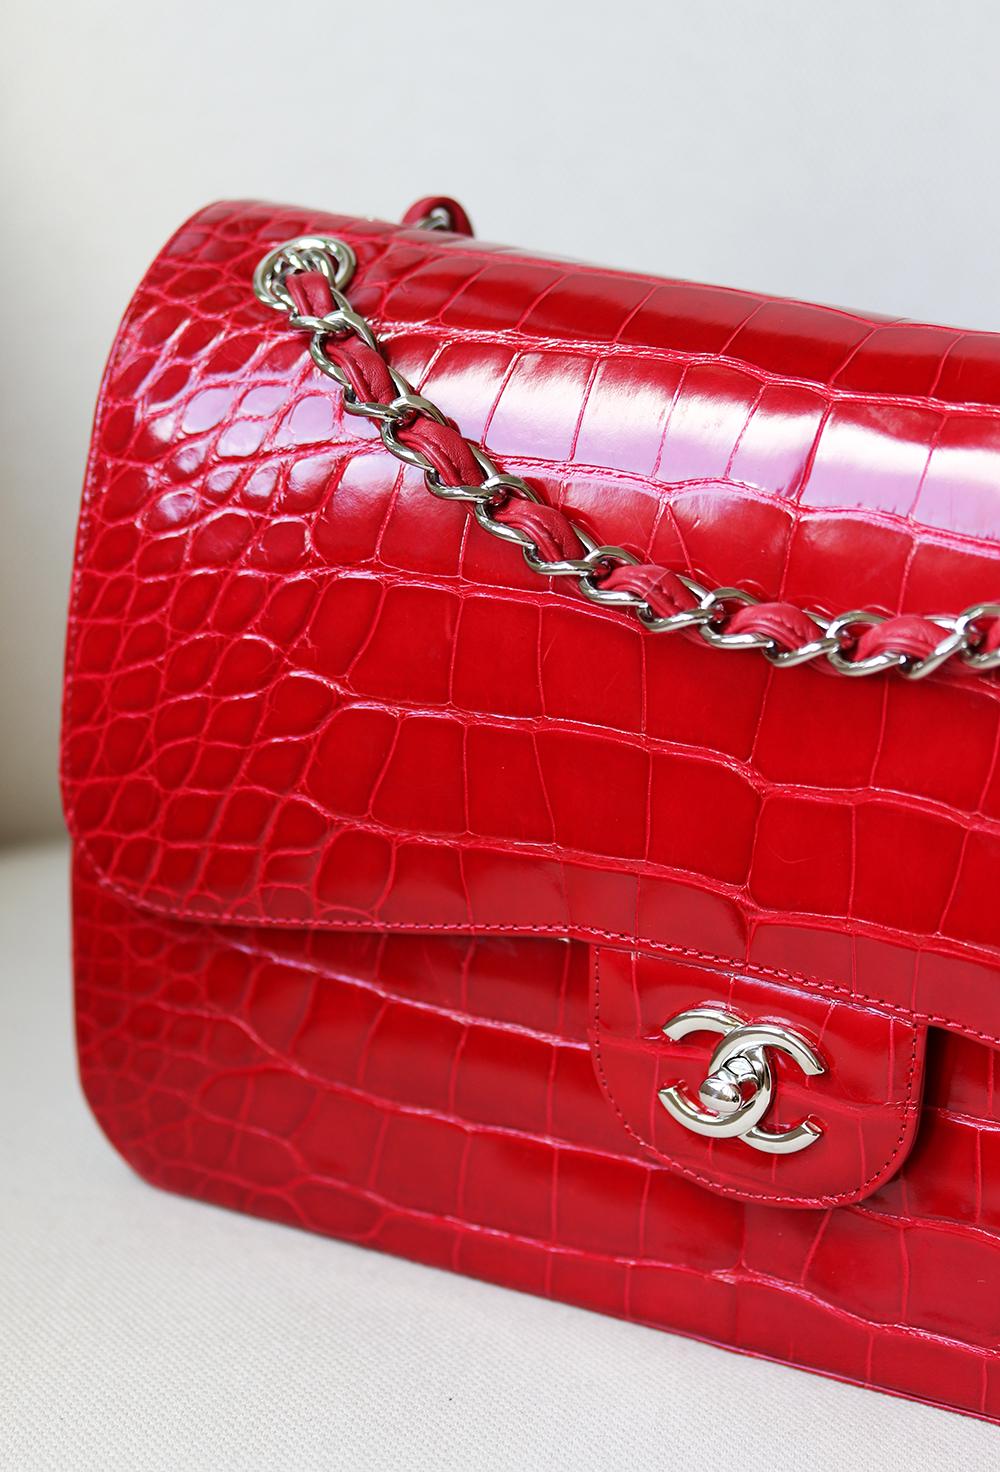 Chanel Alligator Jumbo Classic Double Flap Bag has been hand-finished by skilled artisans in the label's workshop.
Boasting vibrant red alligator leather exterior, this design is accented with silver-toned and red lambskin-leather chain strap.
Made